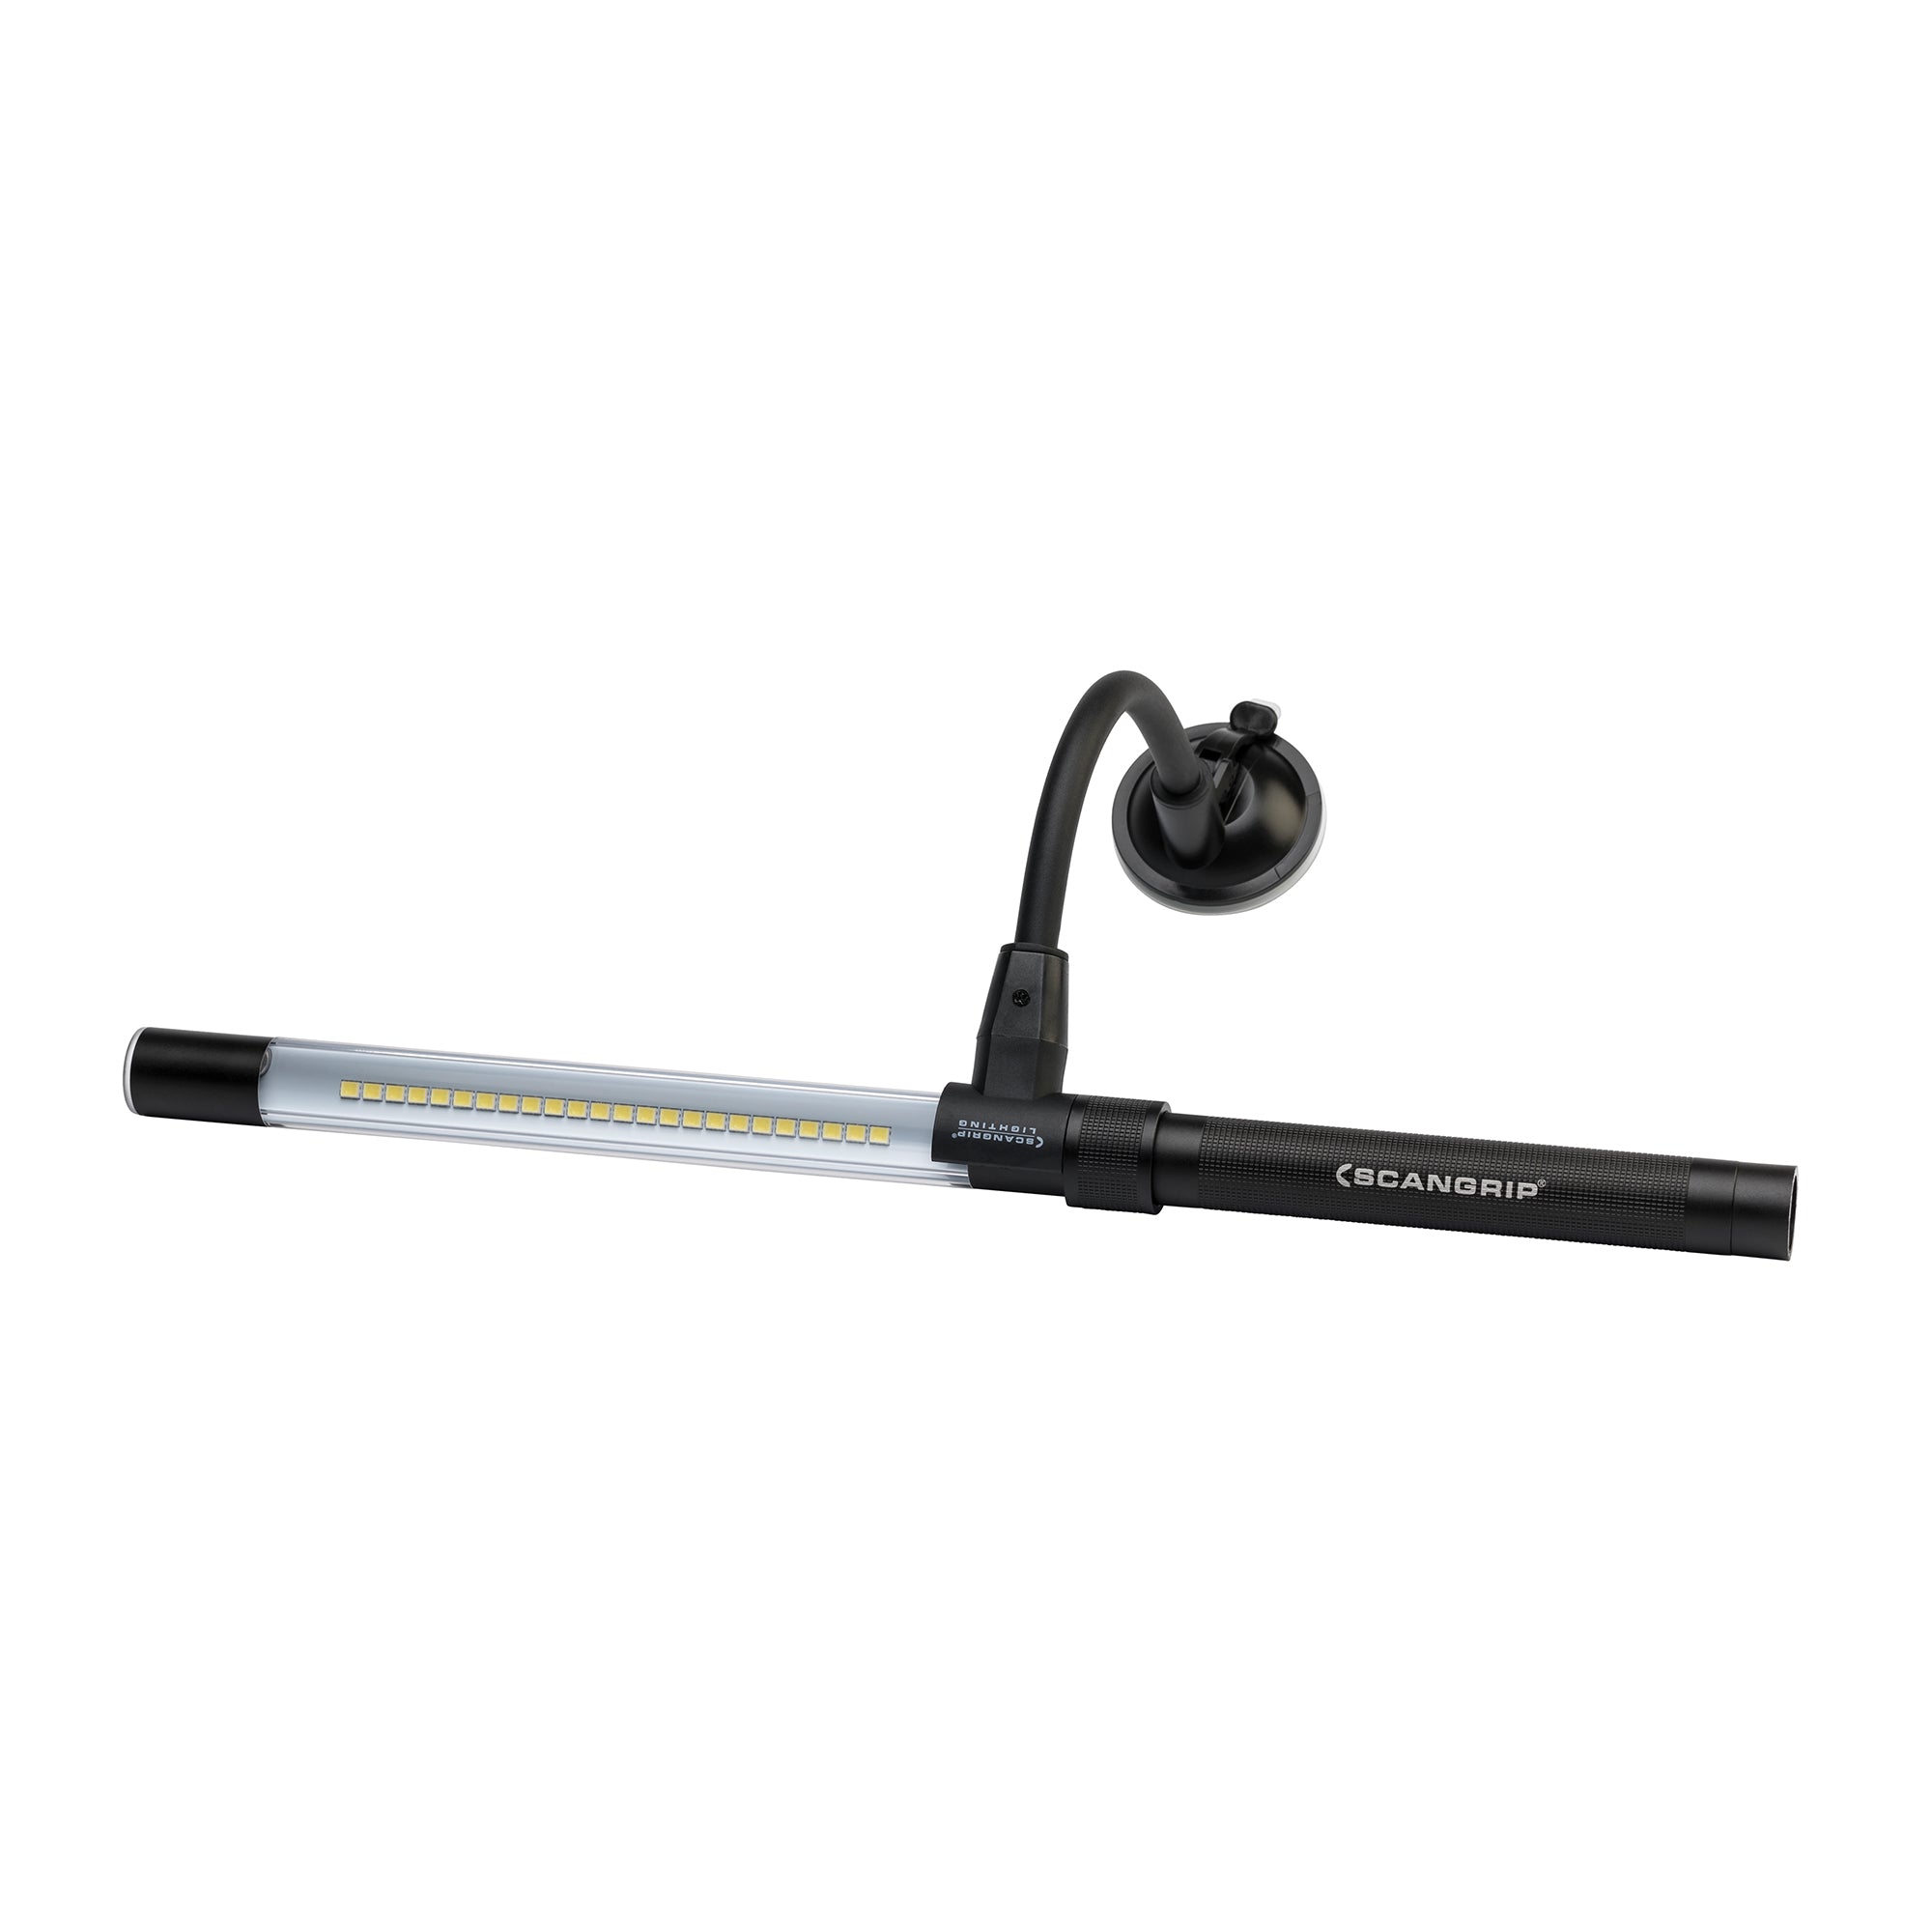 Scangrip Line Light C+R Rechargeable LED Work Light With Dual System